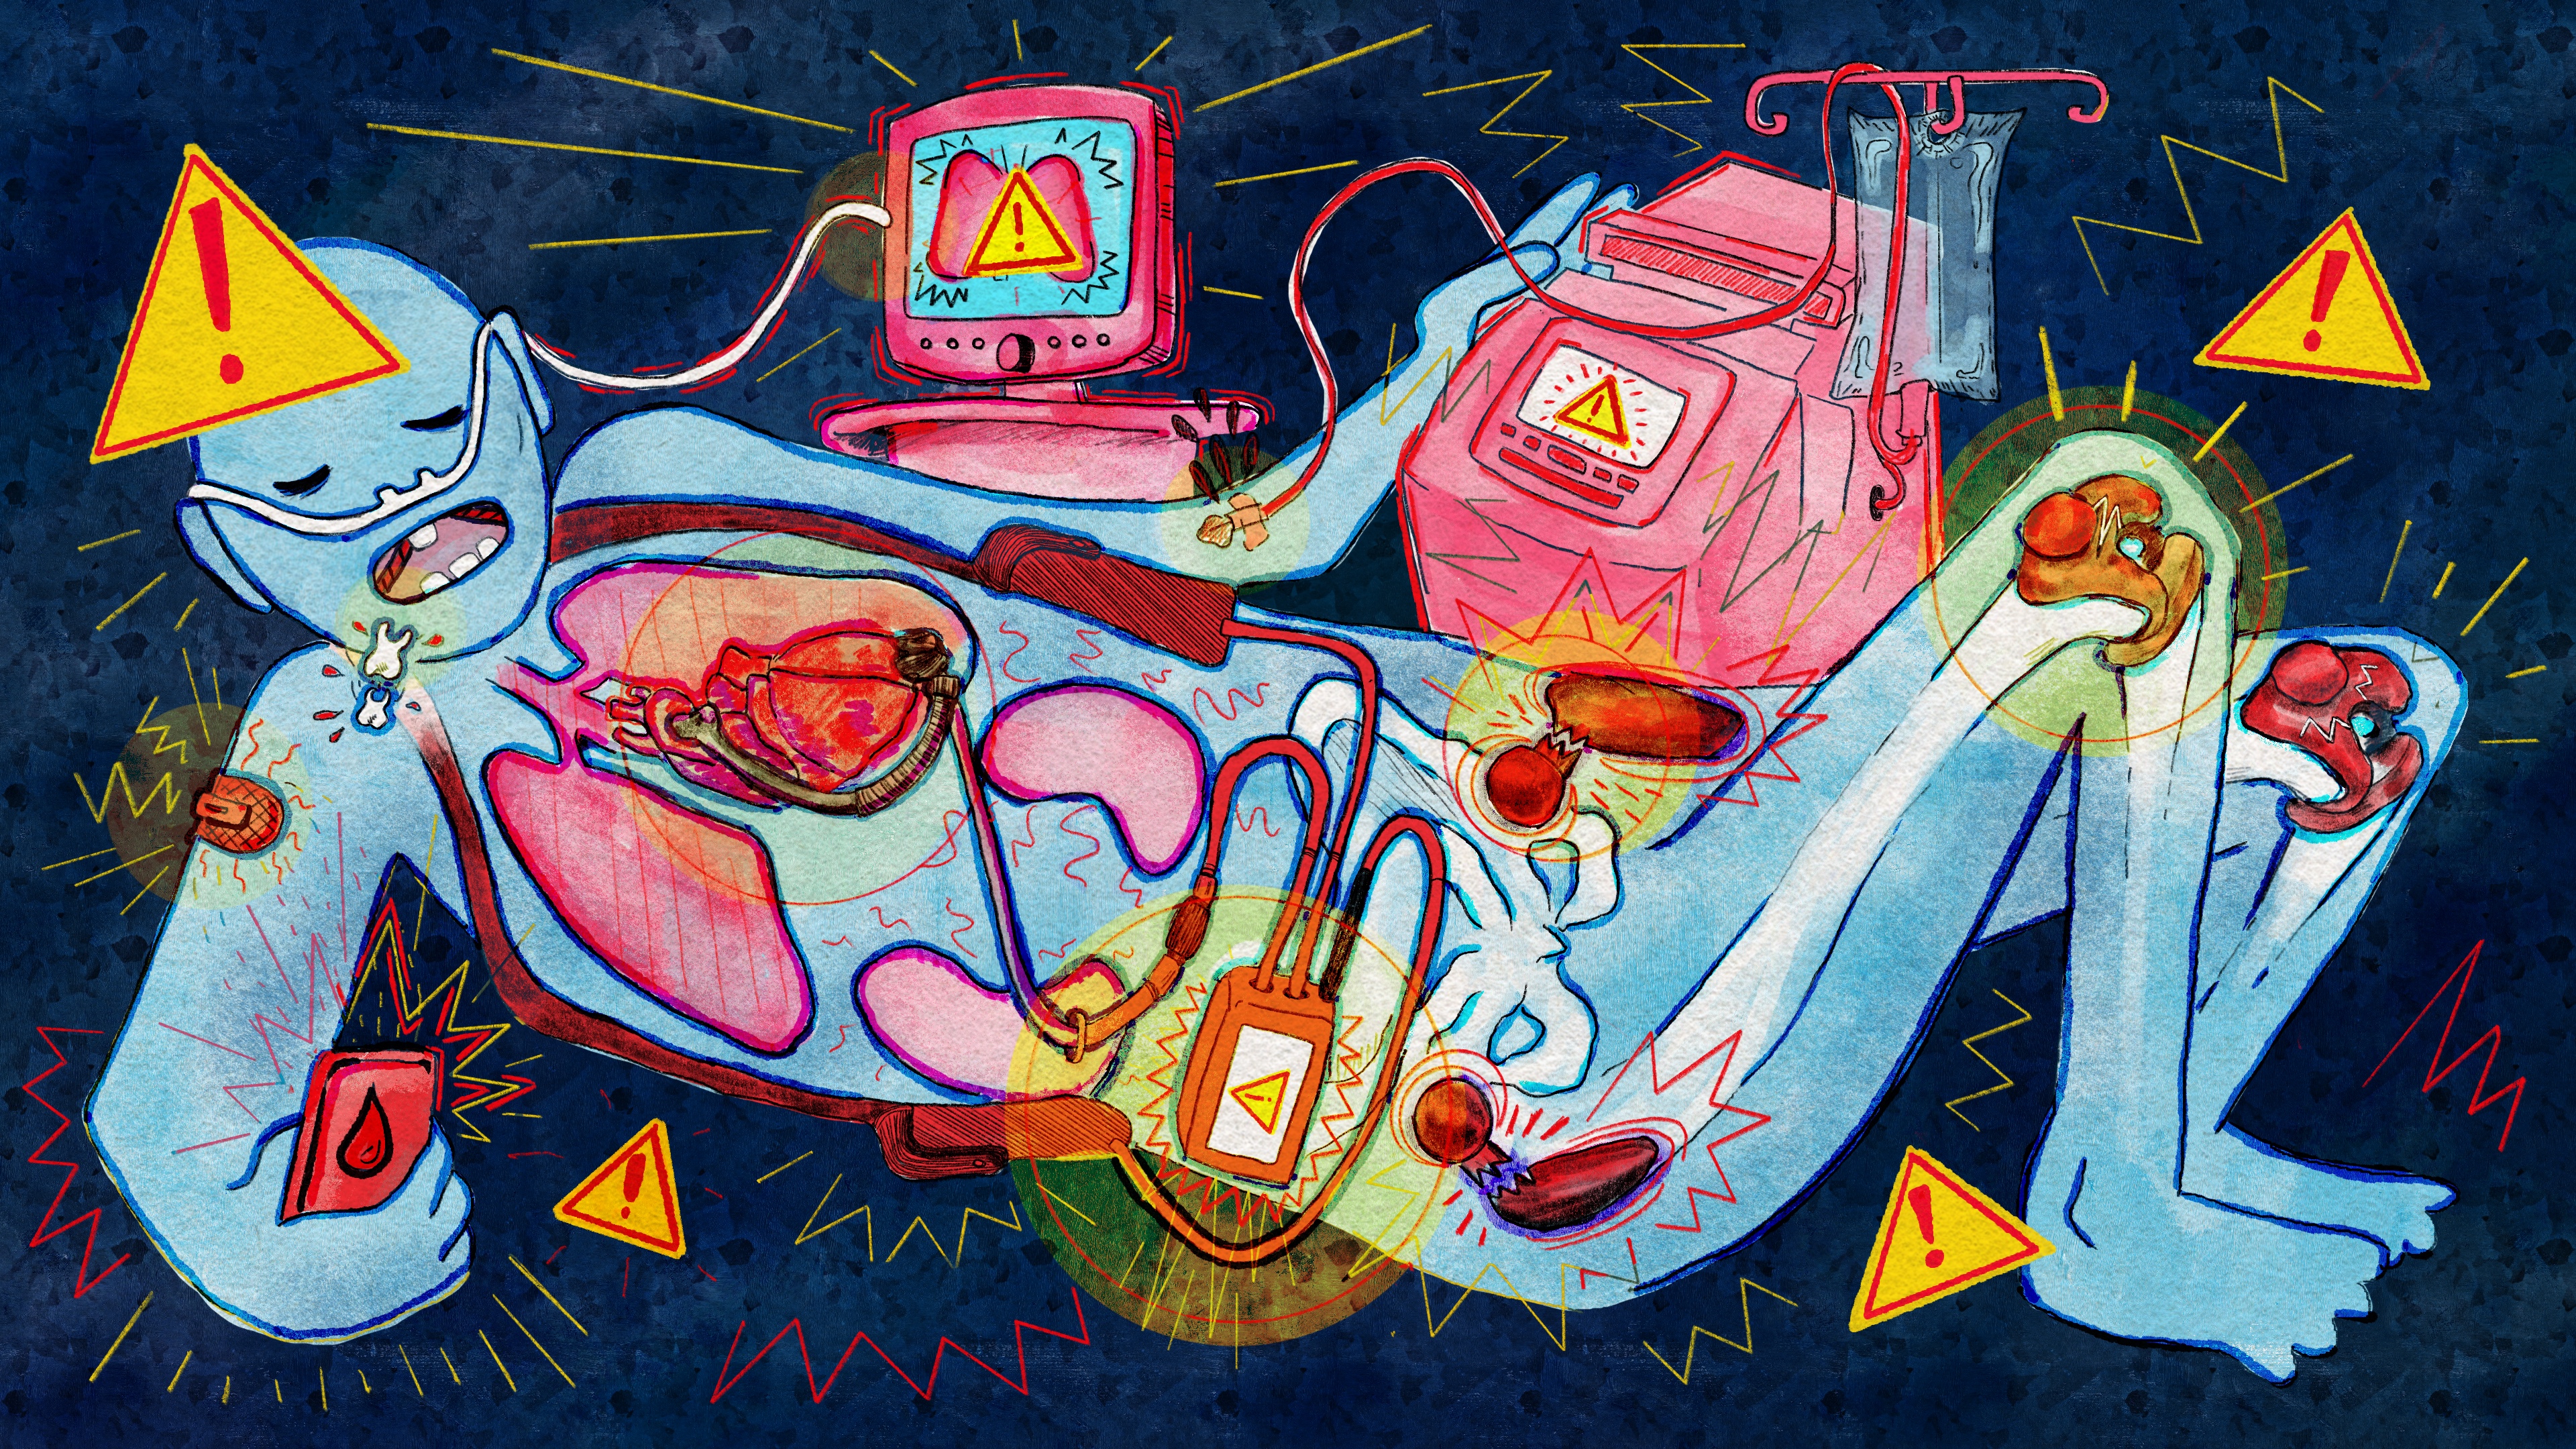 A colorful, digital illustration in pencil and watercolor shows a cartoon figure hooked up to an array of medical devices. The figure has a device in their mouth, which has caused two teeth to fall out; a glucose monitor on their arm is connected to a cellphone; a ventilator is connected to their lungs; a device is connected to their heart from the inside with battery packs on the outside; a hemodialysis machine causes blood to spurt from a vein unnoticed; and hip and knee implants are broken. Error symbols (a yellow triangle with a red exclamation point at its center) float in the background and around some of the devices.